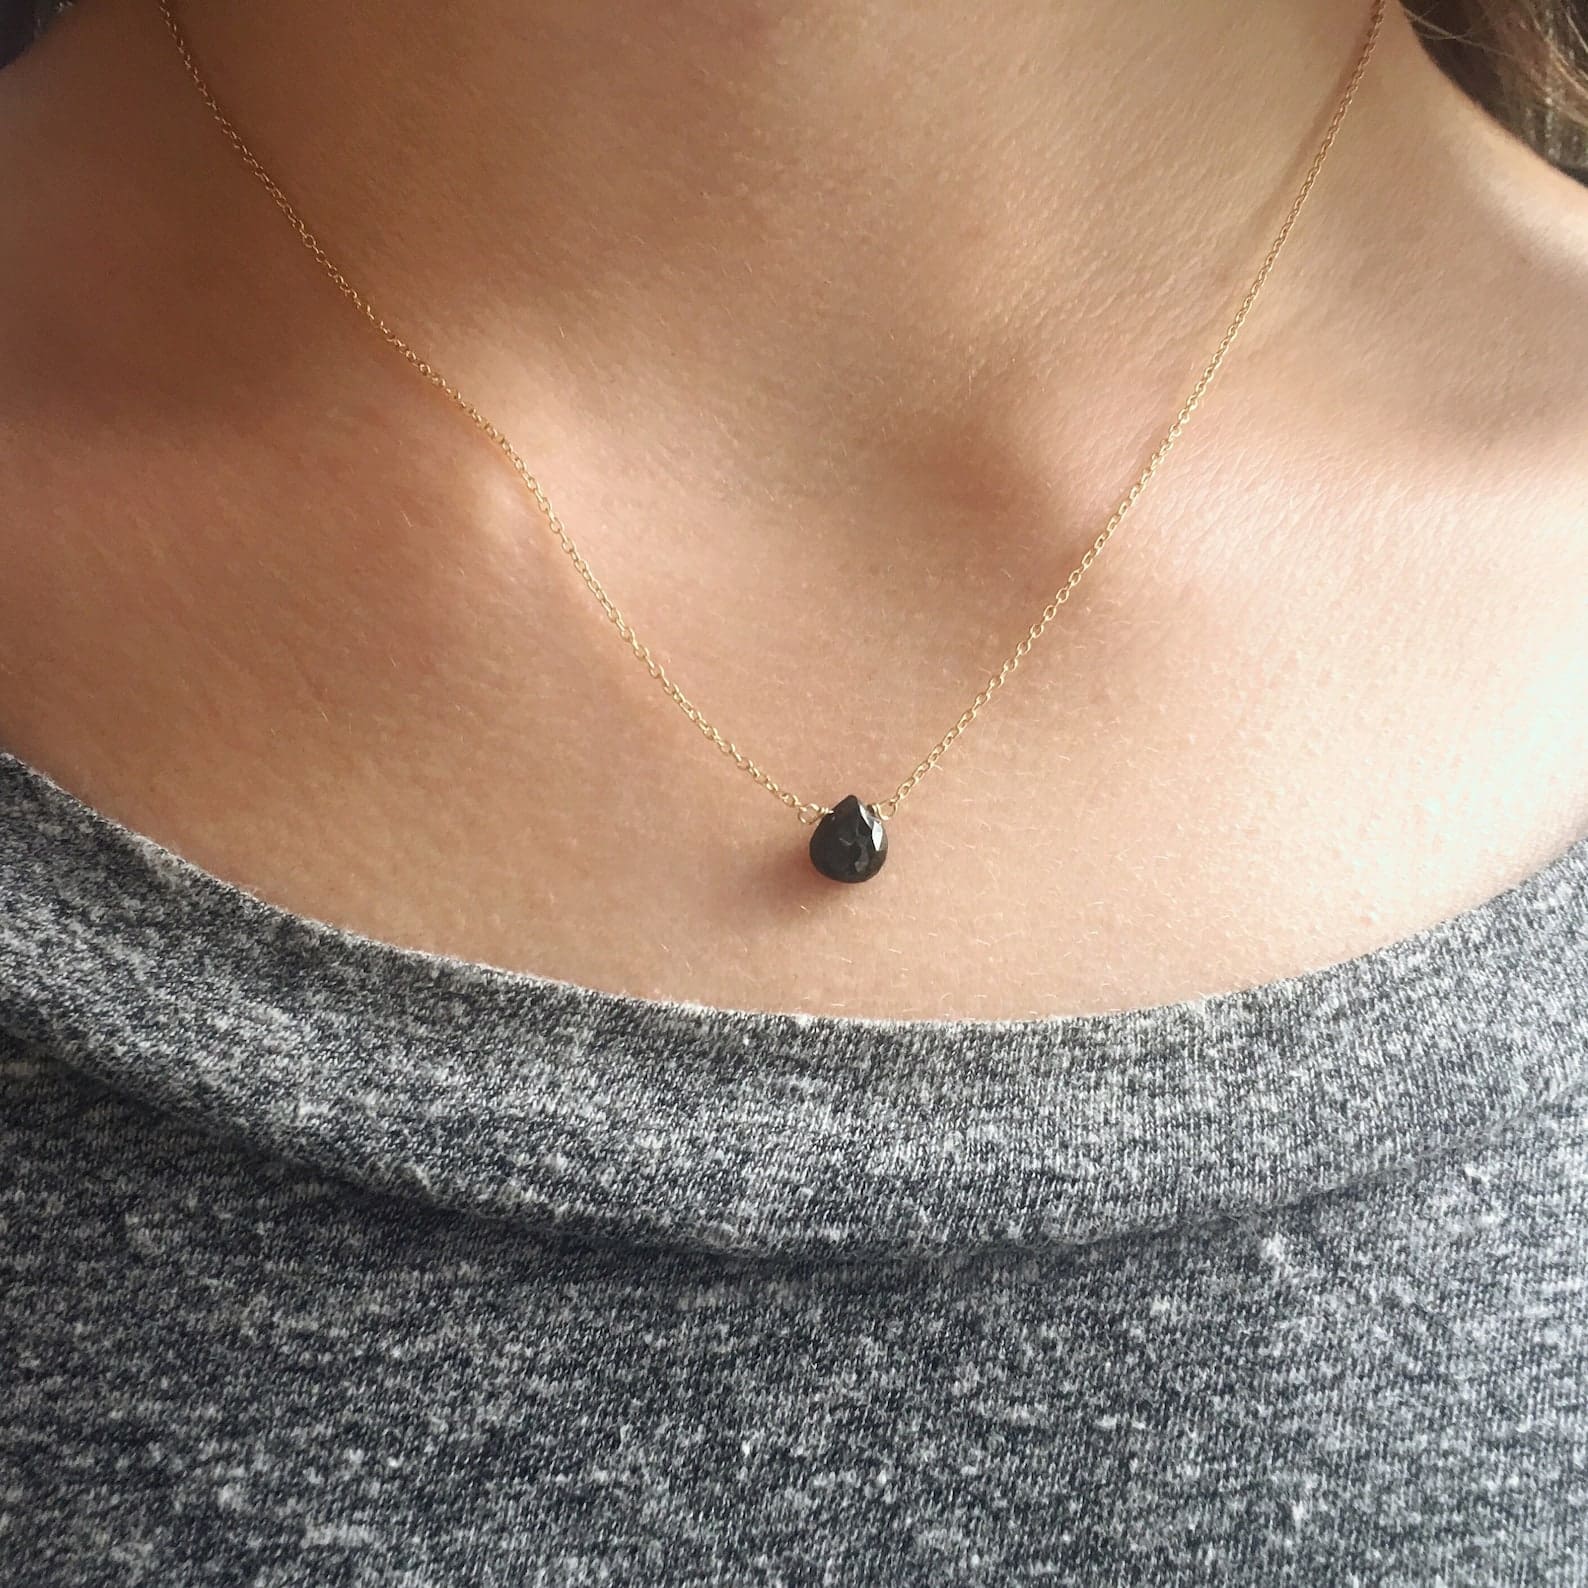 black spinel pendant necklace on the neck